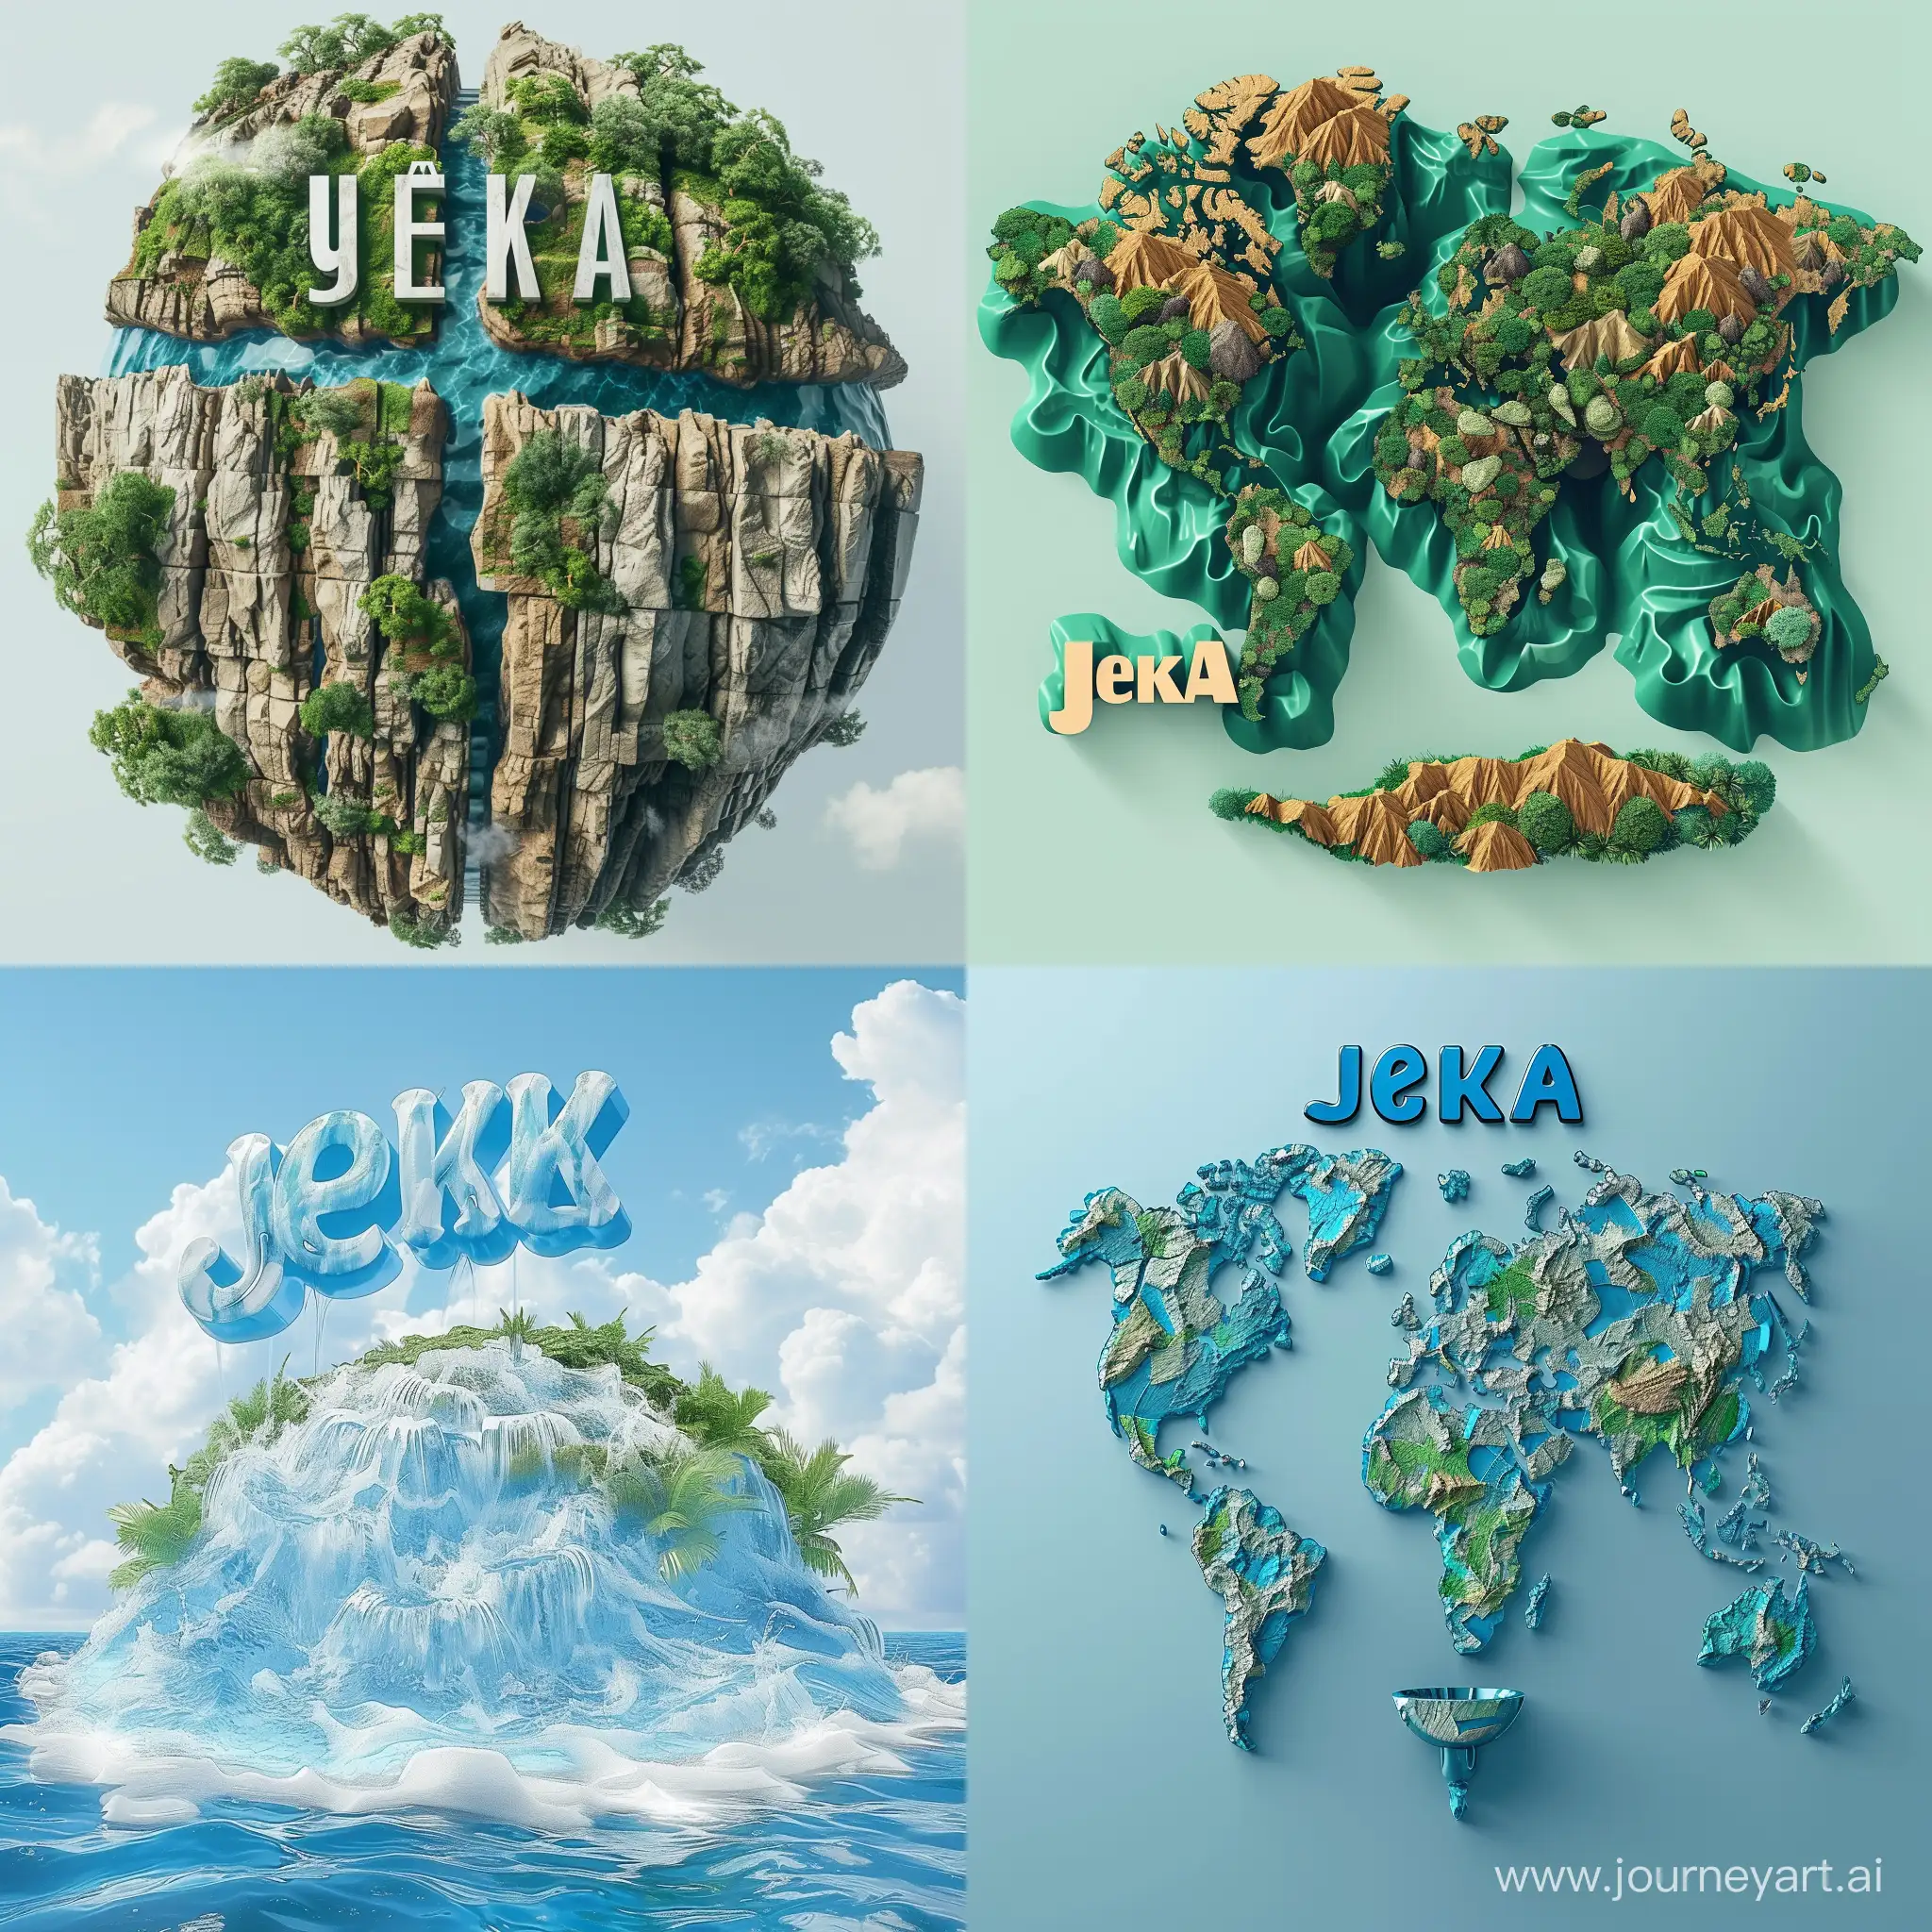 a large image of the world "Jeka", with attractive shape of water font,